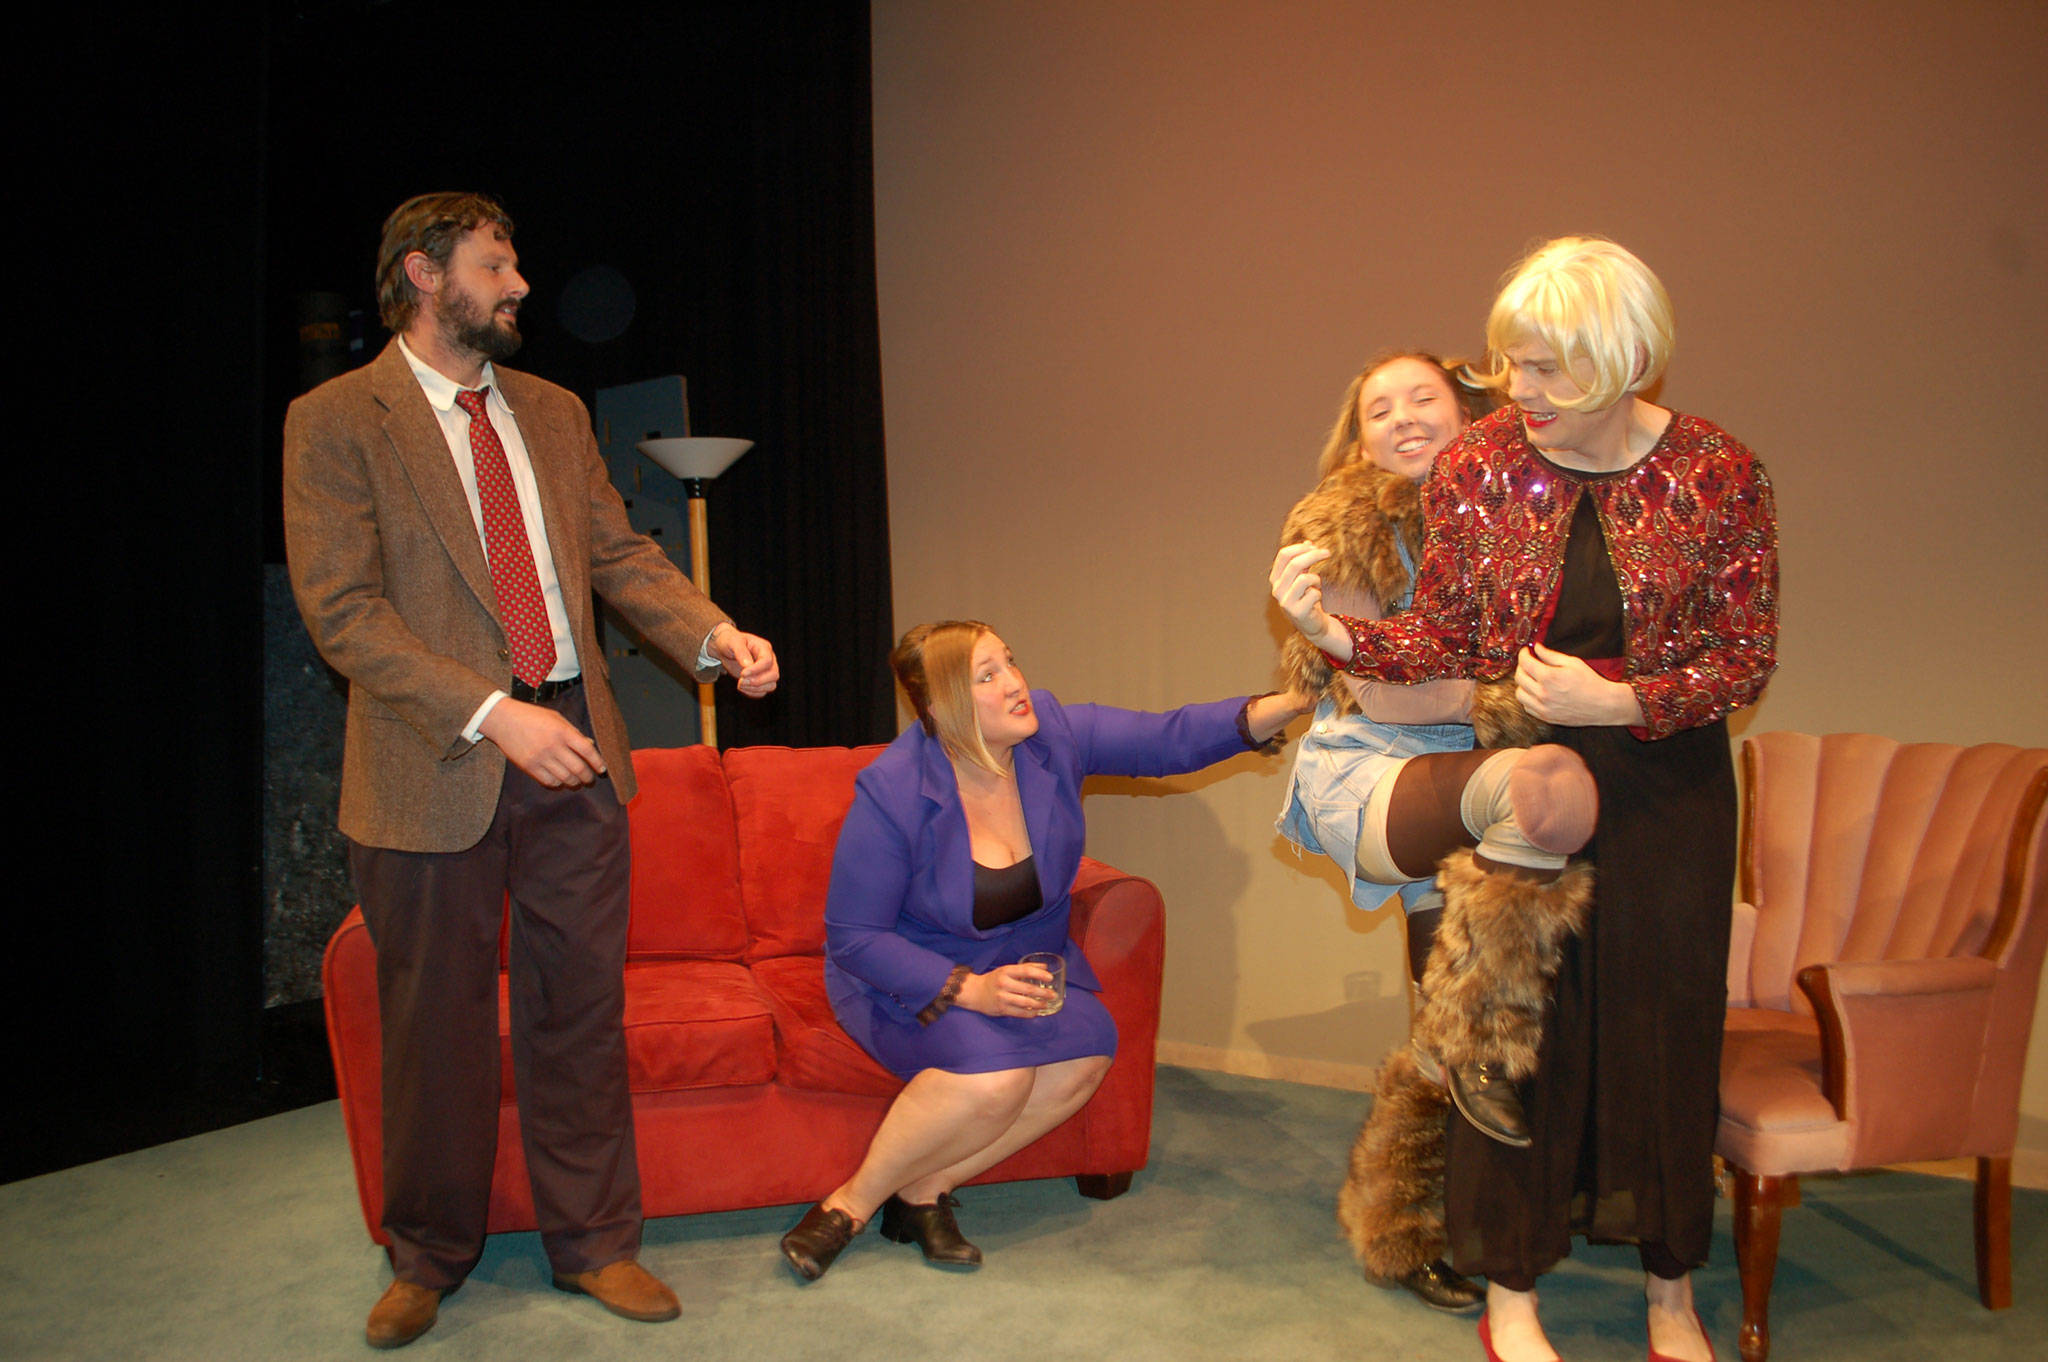 The cast of Olympic Theatre Art’s production of “Sylvia” from left, Edwin J. Anderson III, cast as Greg, Jennifer Horton, cast as Greg’s wife Kate, Melissa Karapostoles, cast as the dog Sylvia, and Michael Sickles, cast as several characters, including a dog enthusiast, friend of Kate’s, and gender ambiguous therapist, rehearse a scene from the show that premieres on Friday, Oct. 19. Sequim Gazette photo by Erin Hawkins